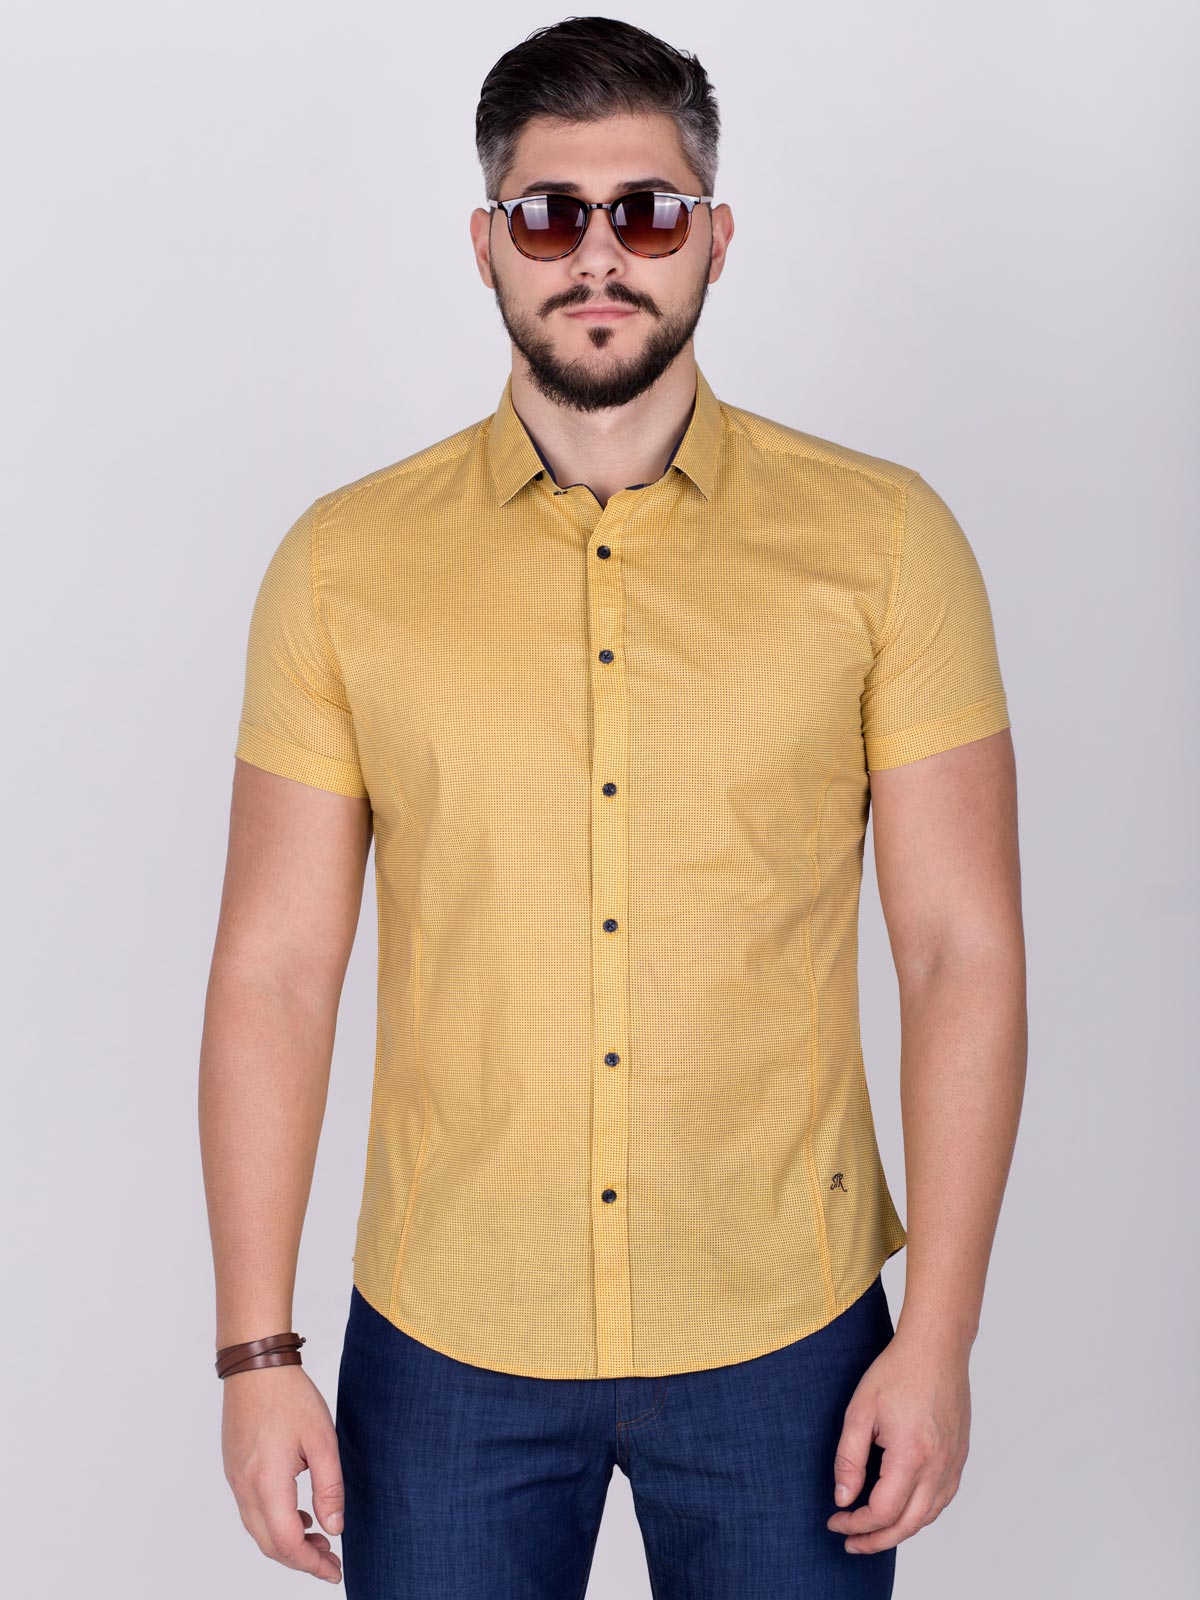 Yellow fitted shirt for small figures - 80200 € 11.25 img3